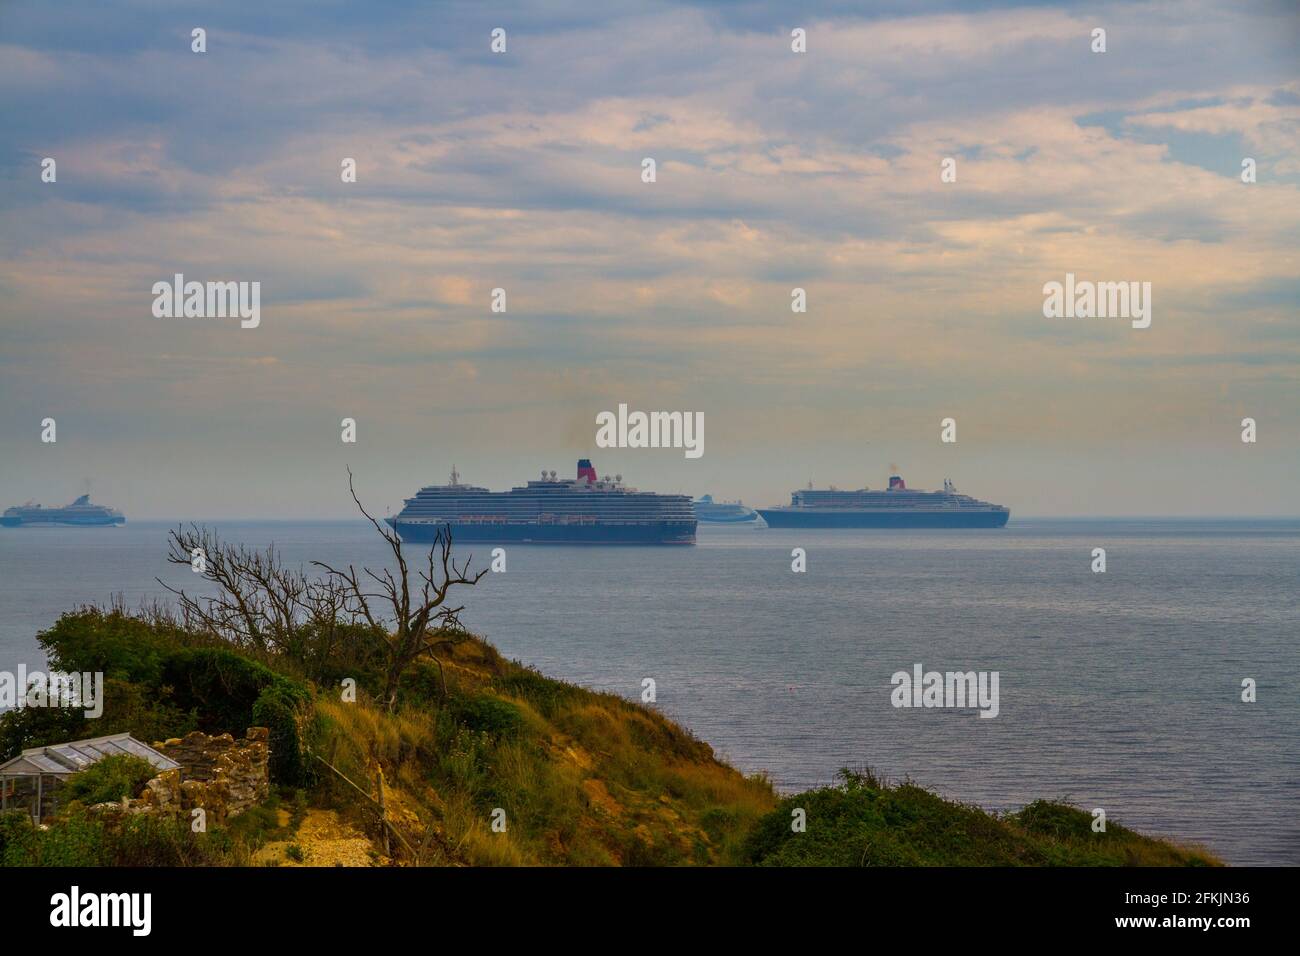 WEYMOUTH - AUGUST 16 2020: Four Cruise Ships, moored off Dorset, England due to Covid 19 Pandemic, landscape Stock Photo